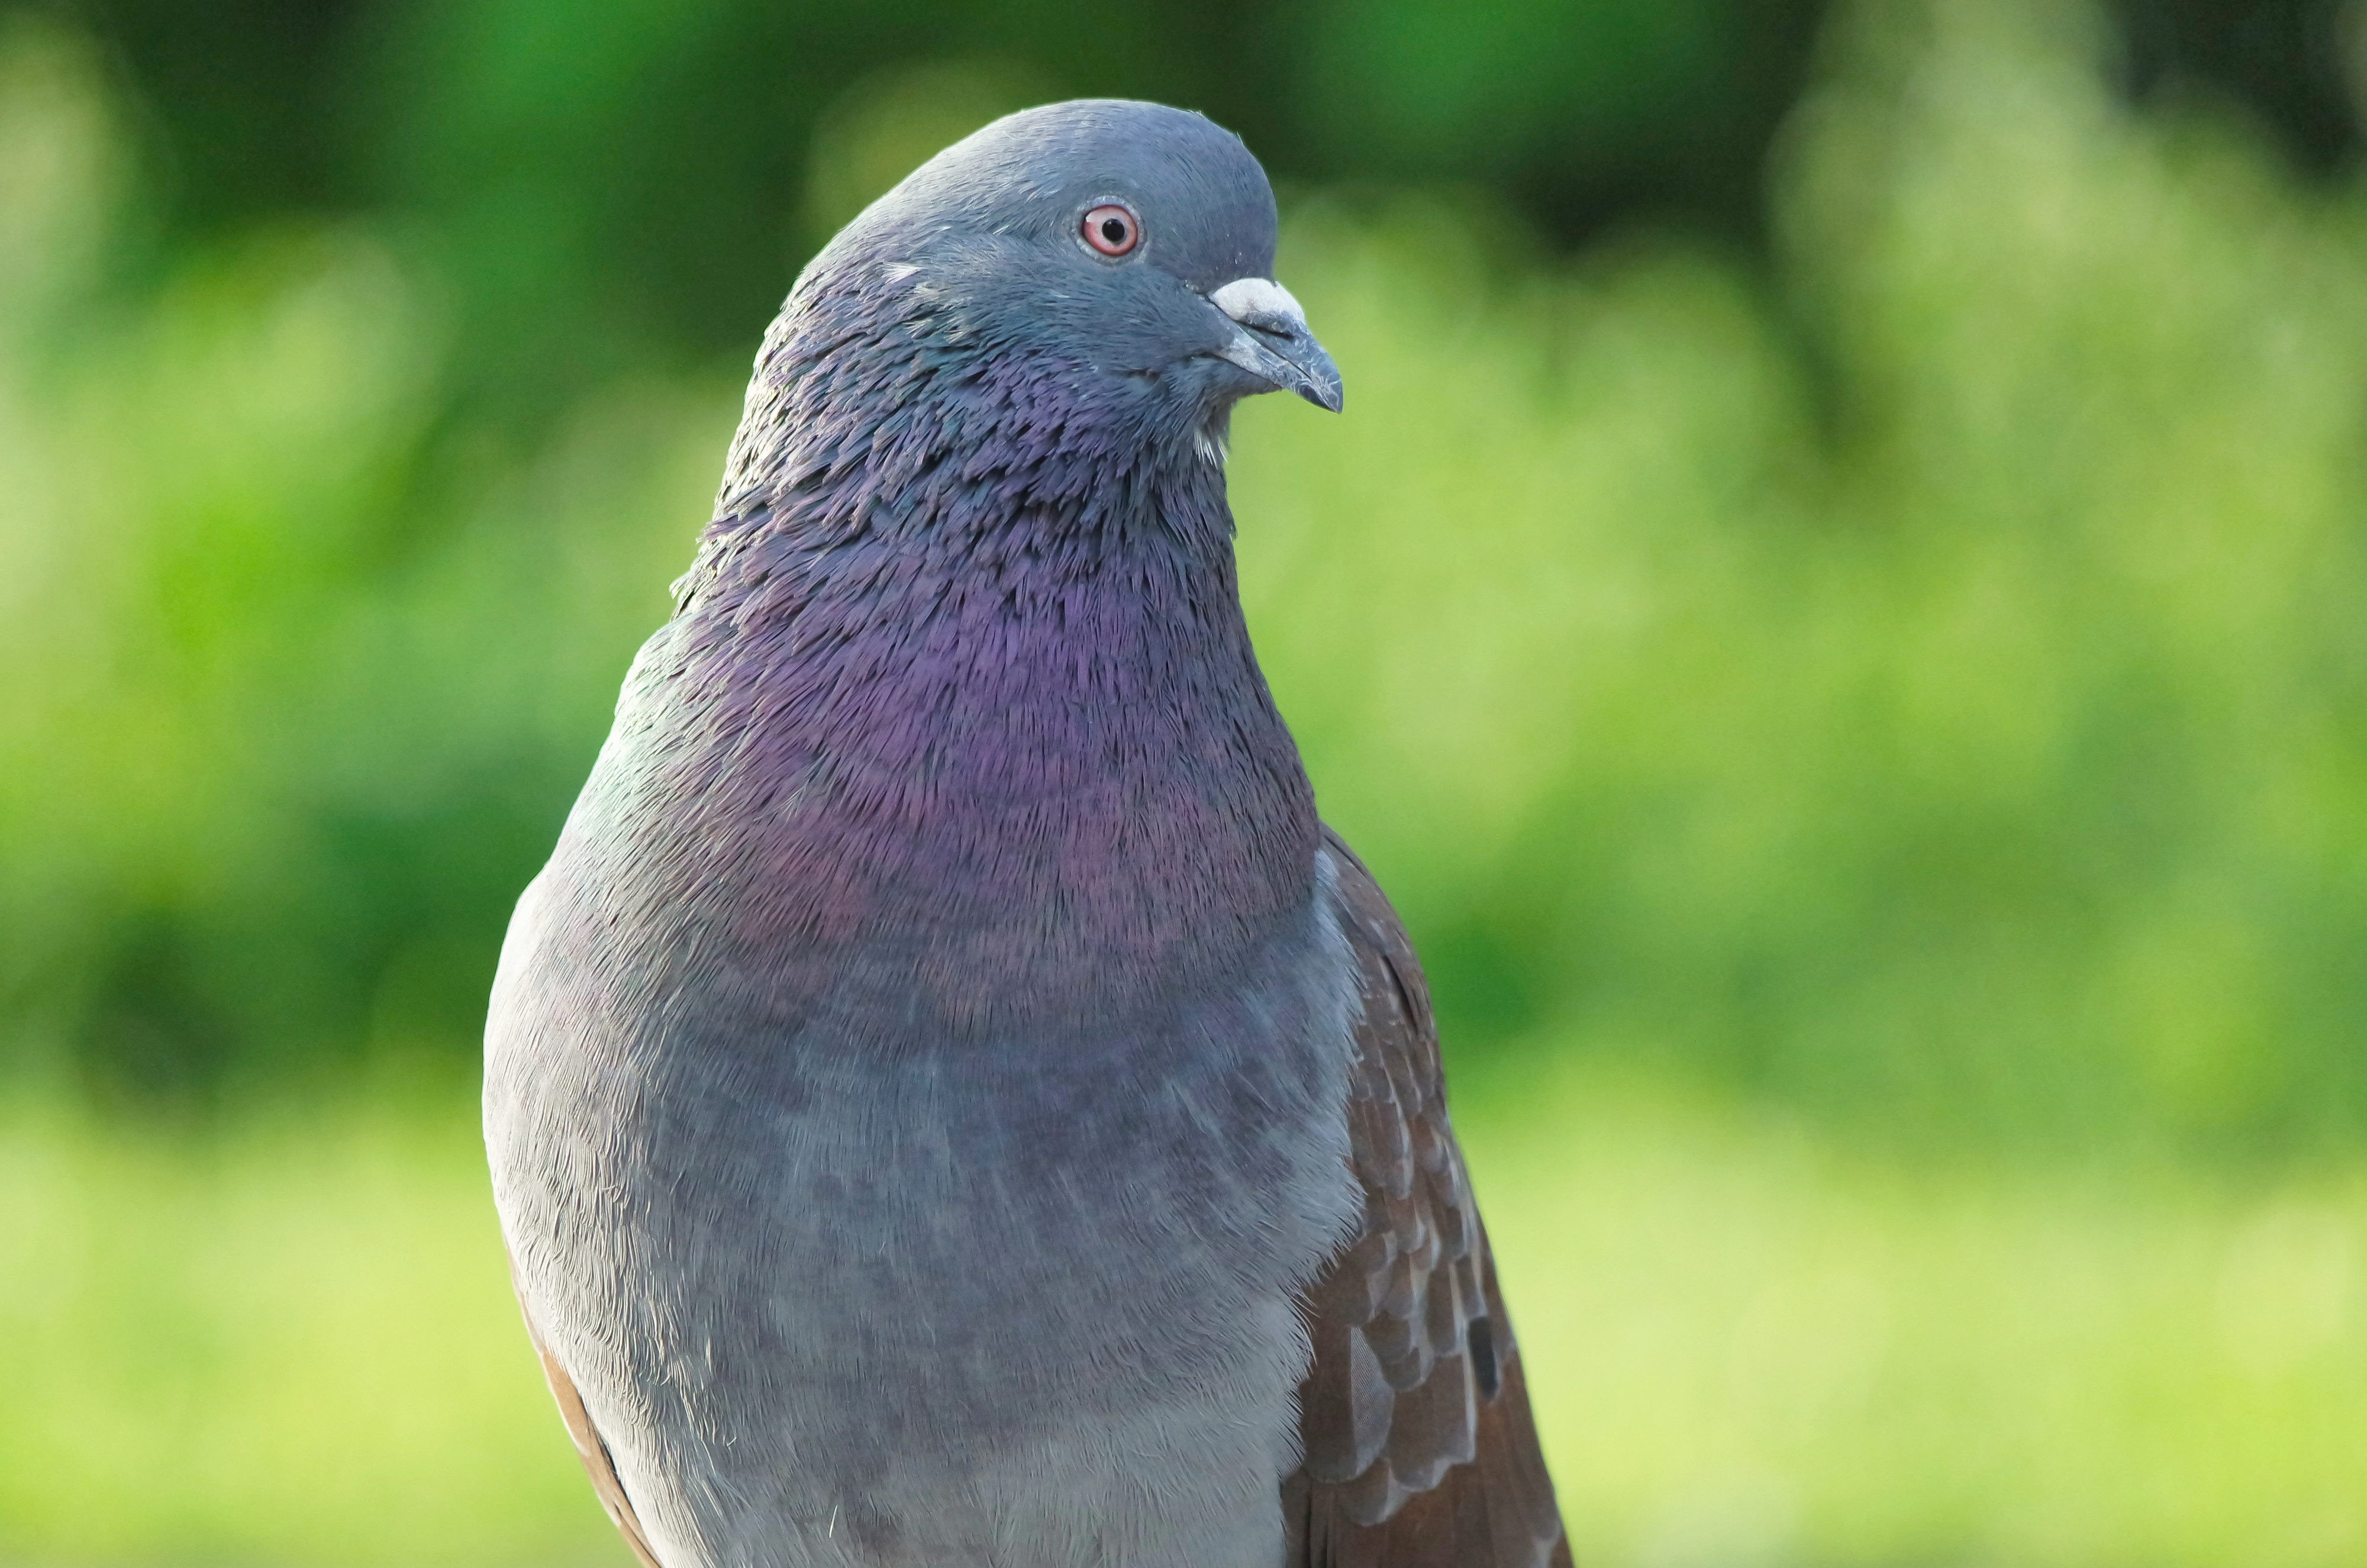 A pigeon outdoors, with its head turned to the right